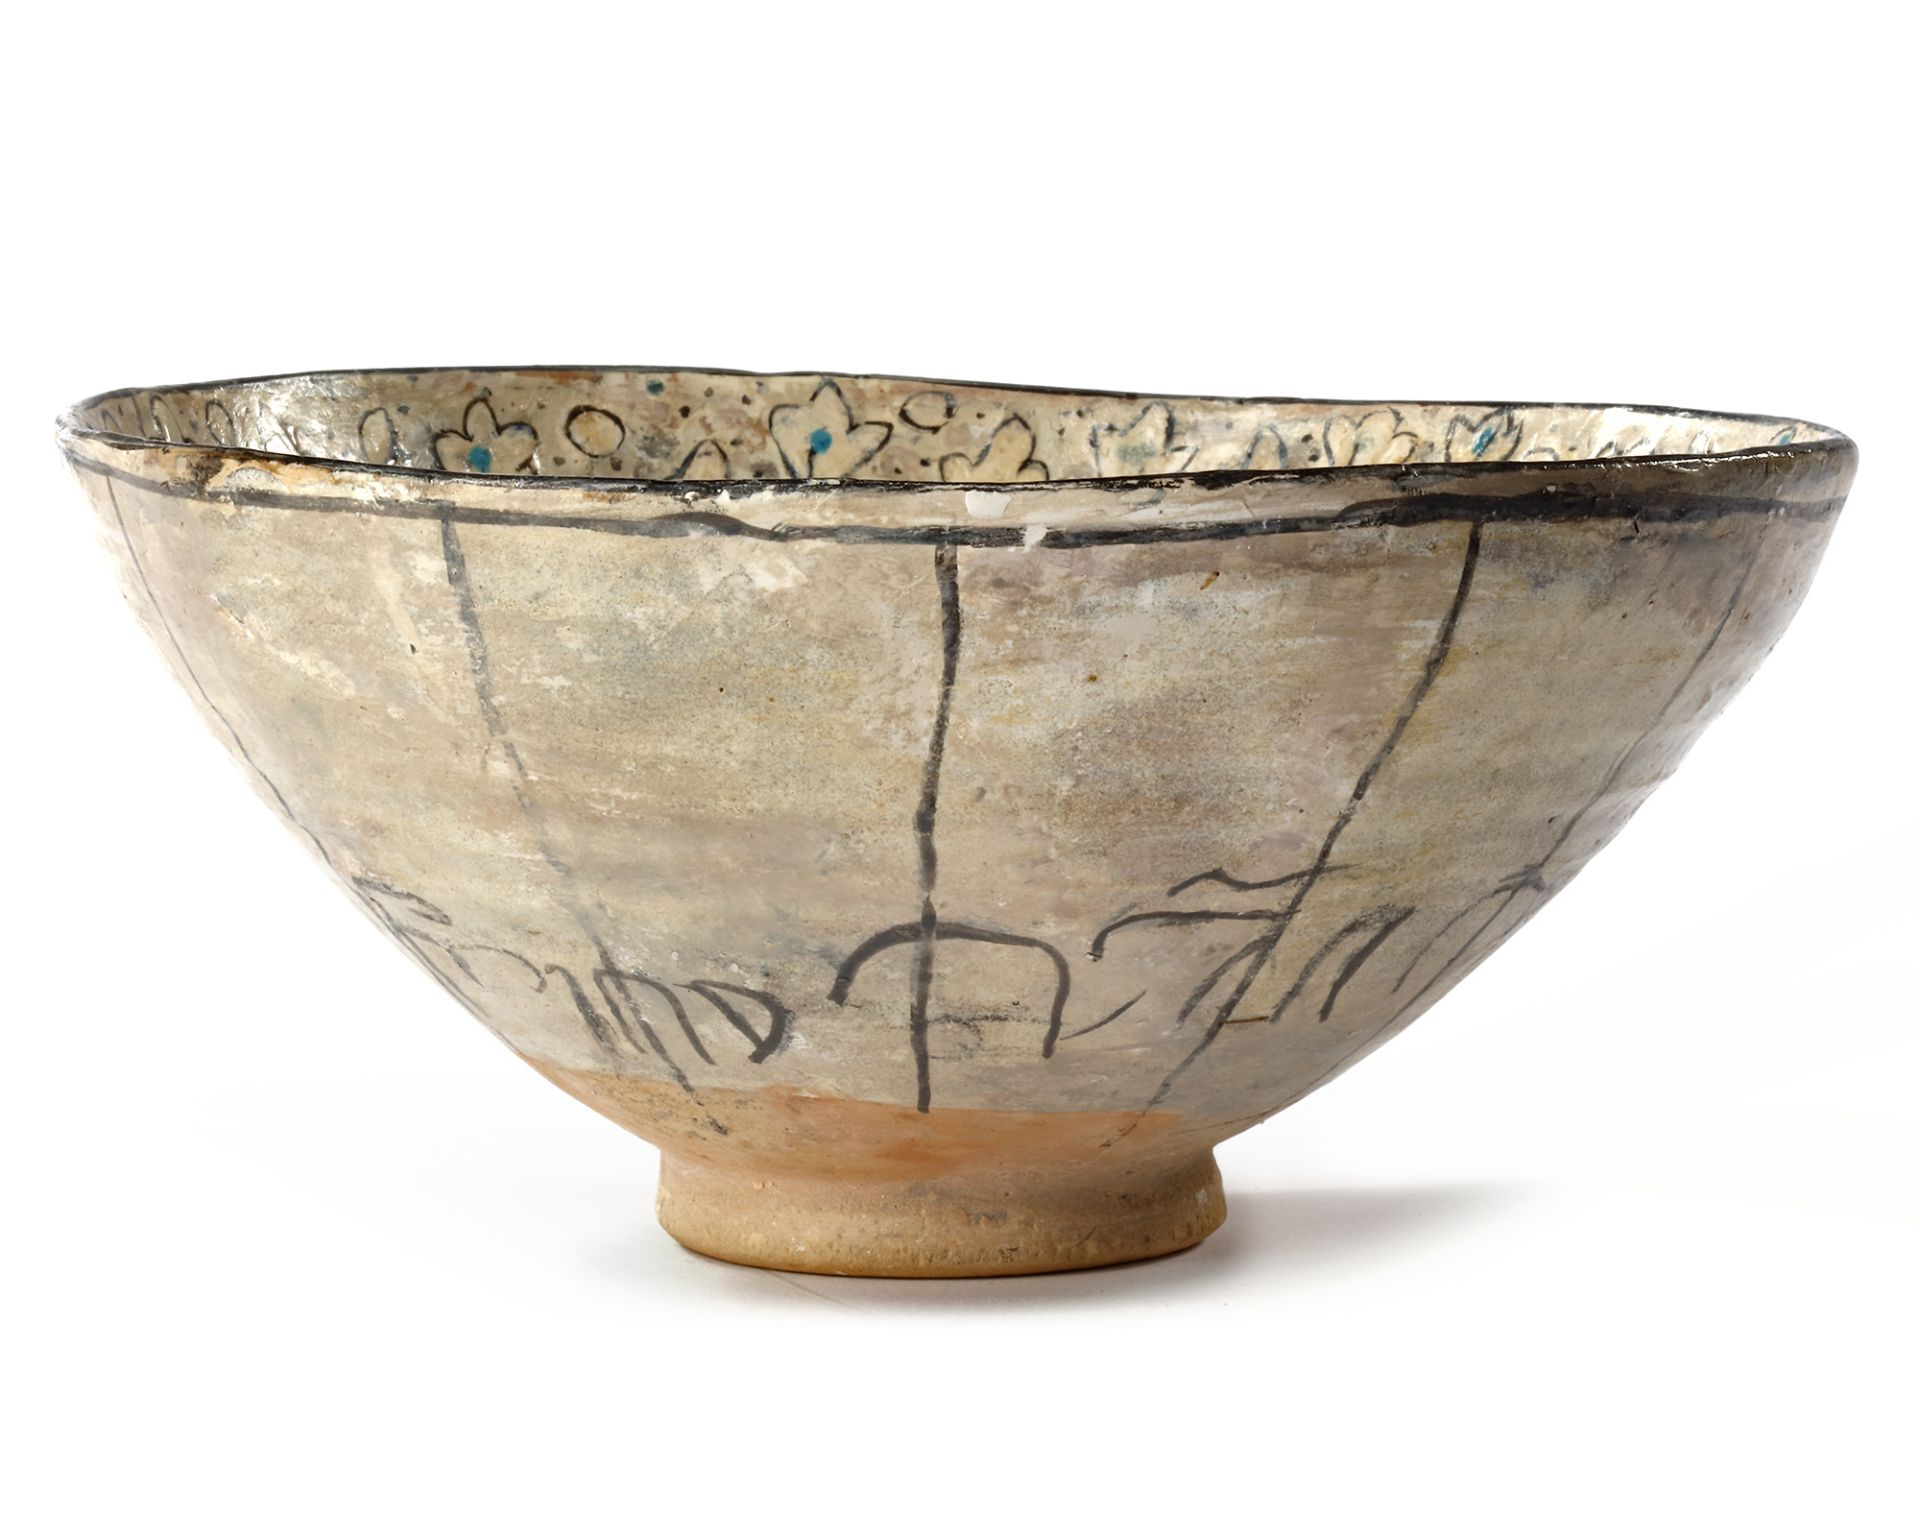 AN ISLAMIC BOWL DEPICTING A BIRD, SULTANABAD WARE, 12TH-13TH CENTURY - Image 5 of 10